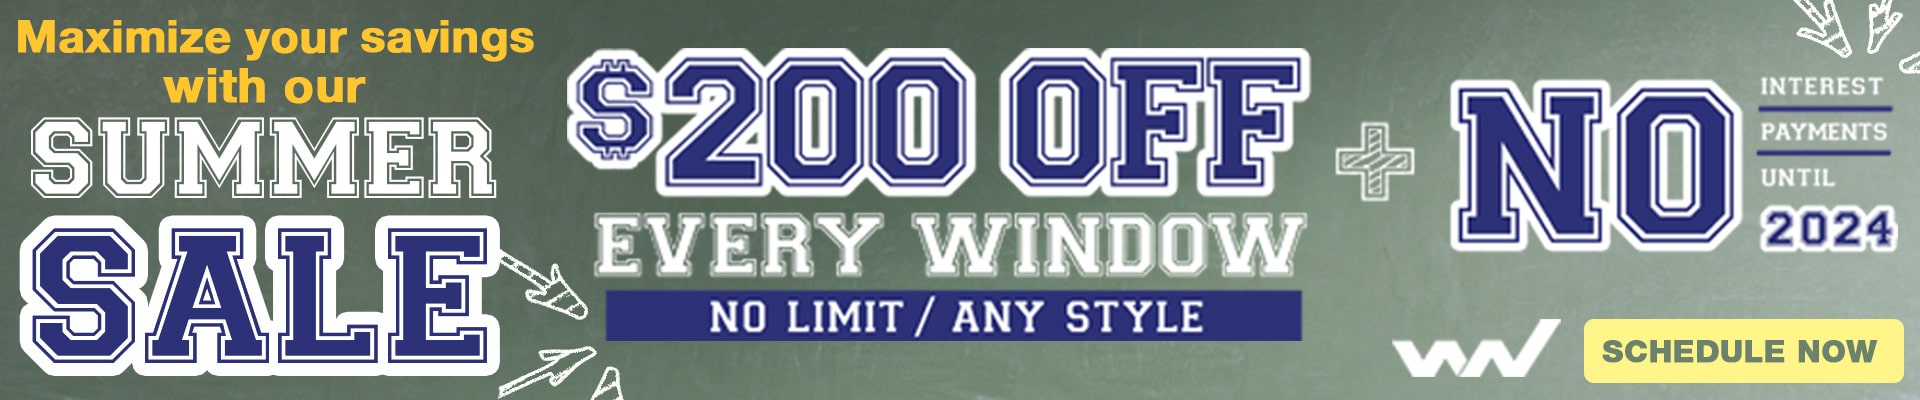 Window Nation Replacement Windows June Offer, Get $200 Off Every Window Style 1920x400